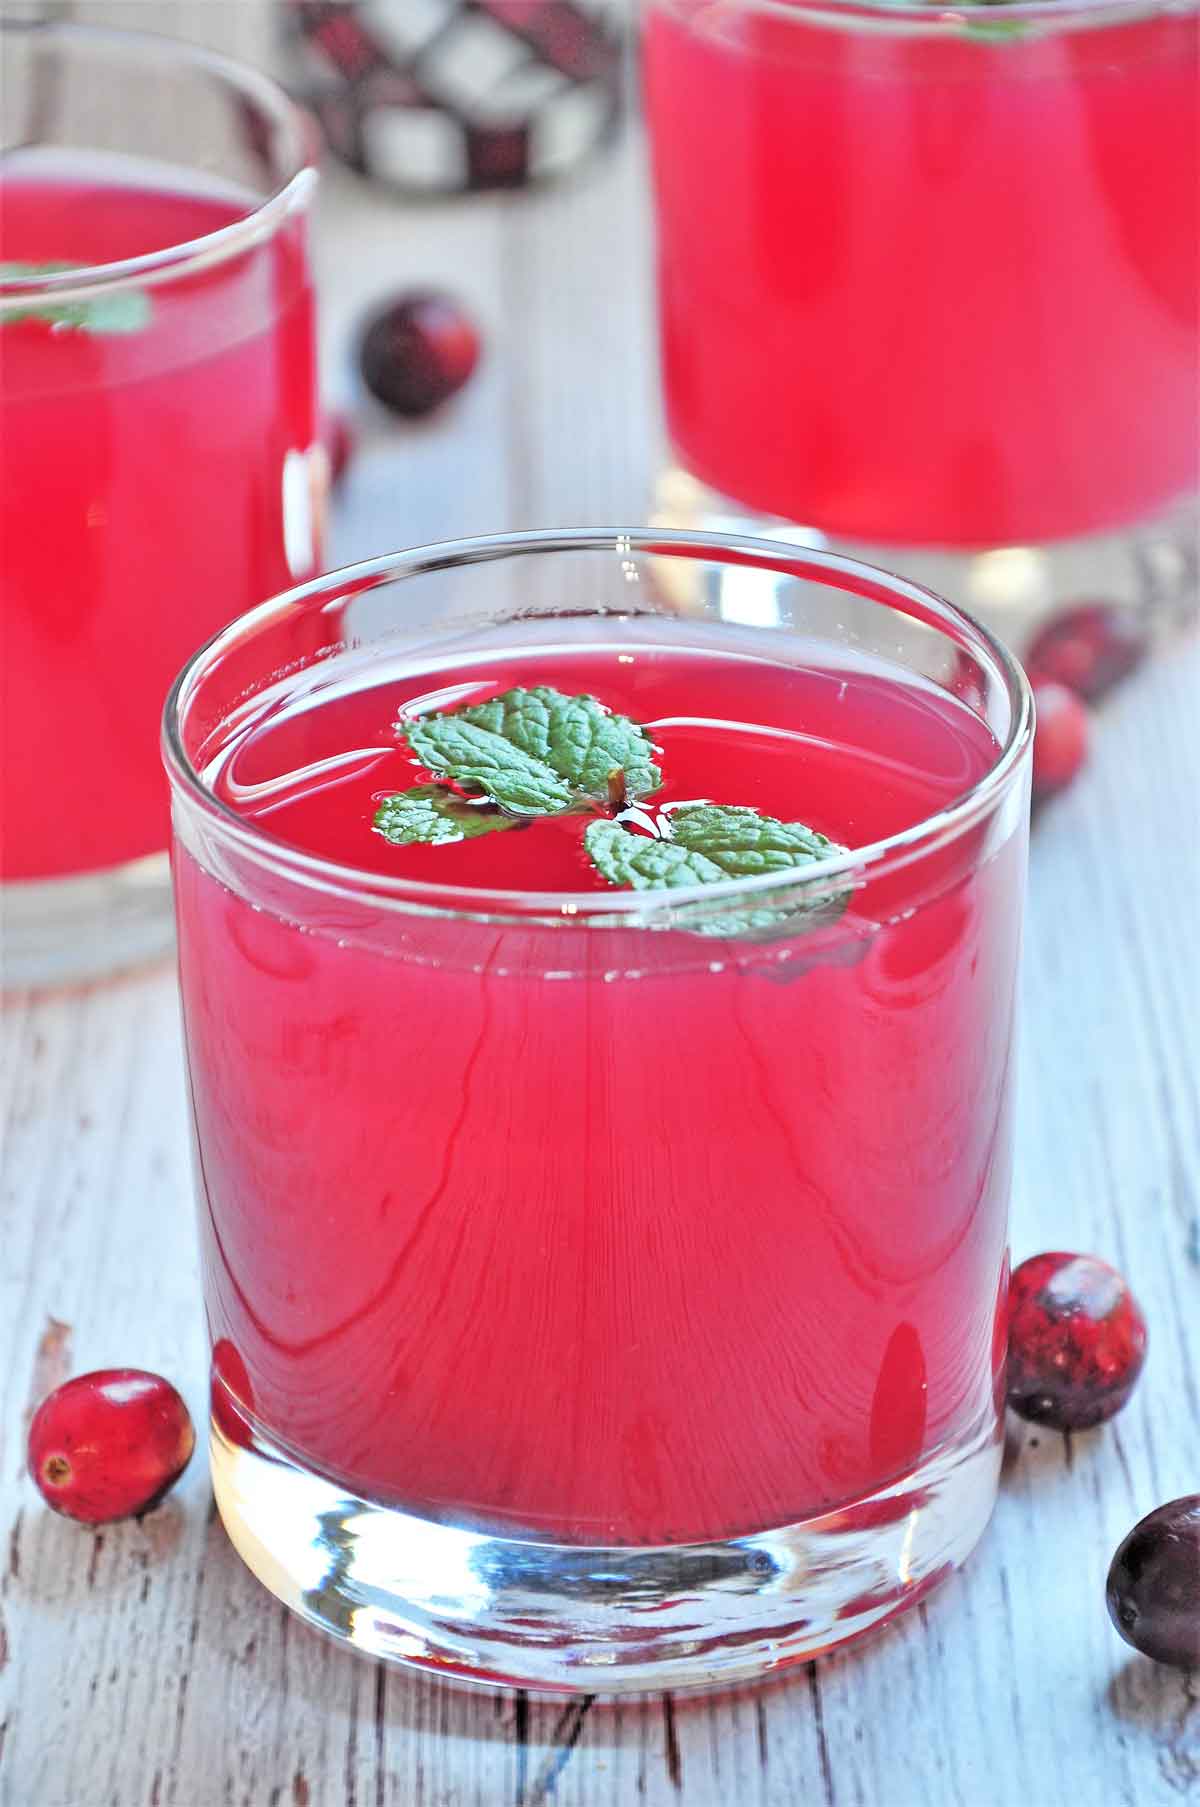 Cranberry juice in a glass and garnished with few mint leaves.